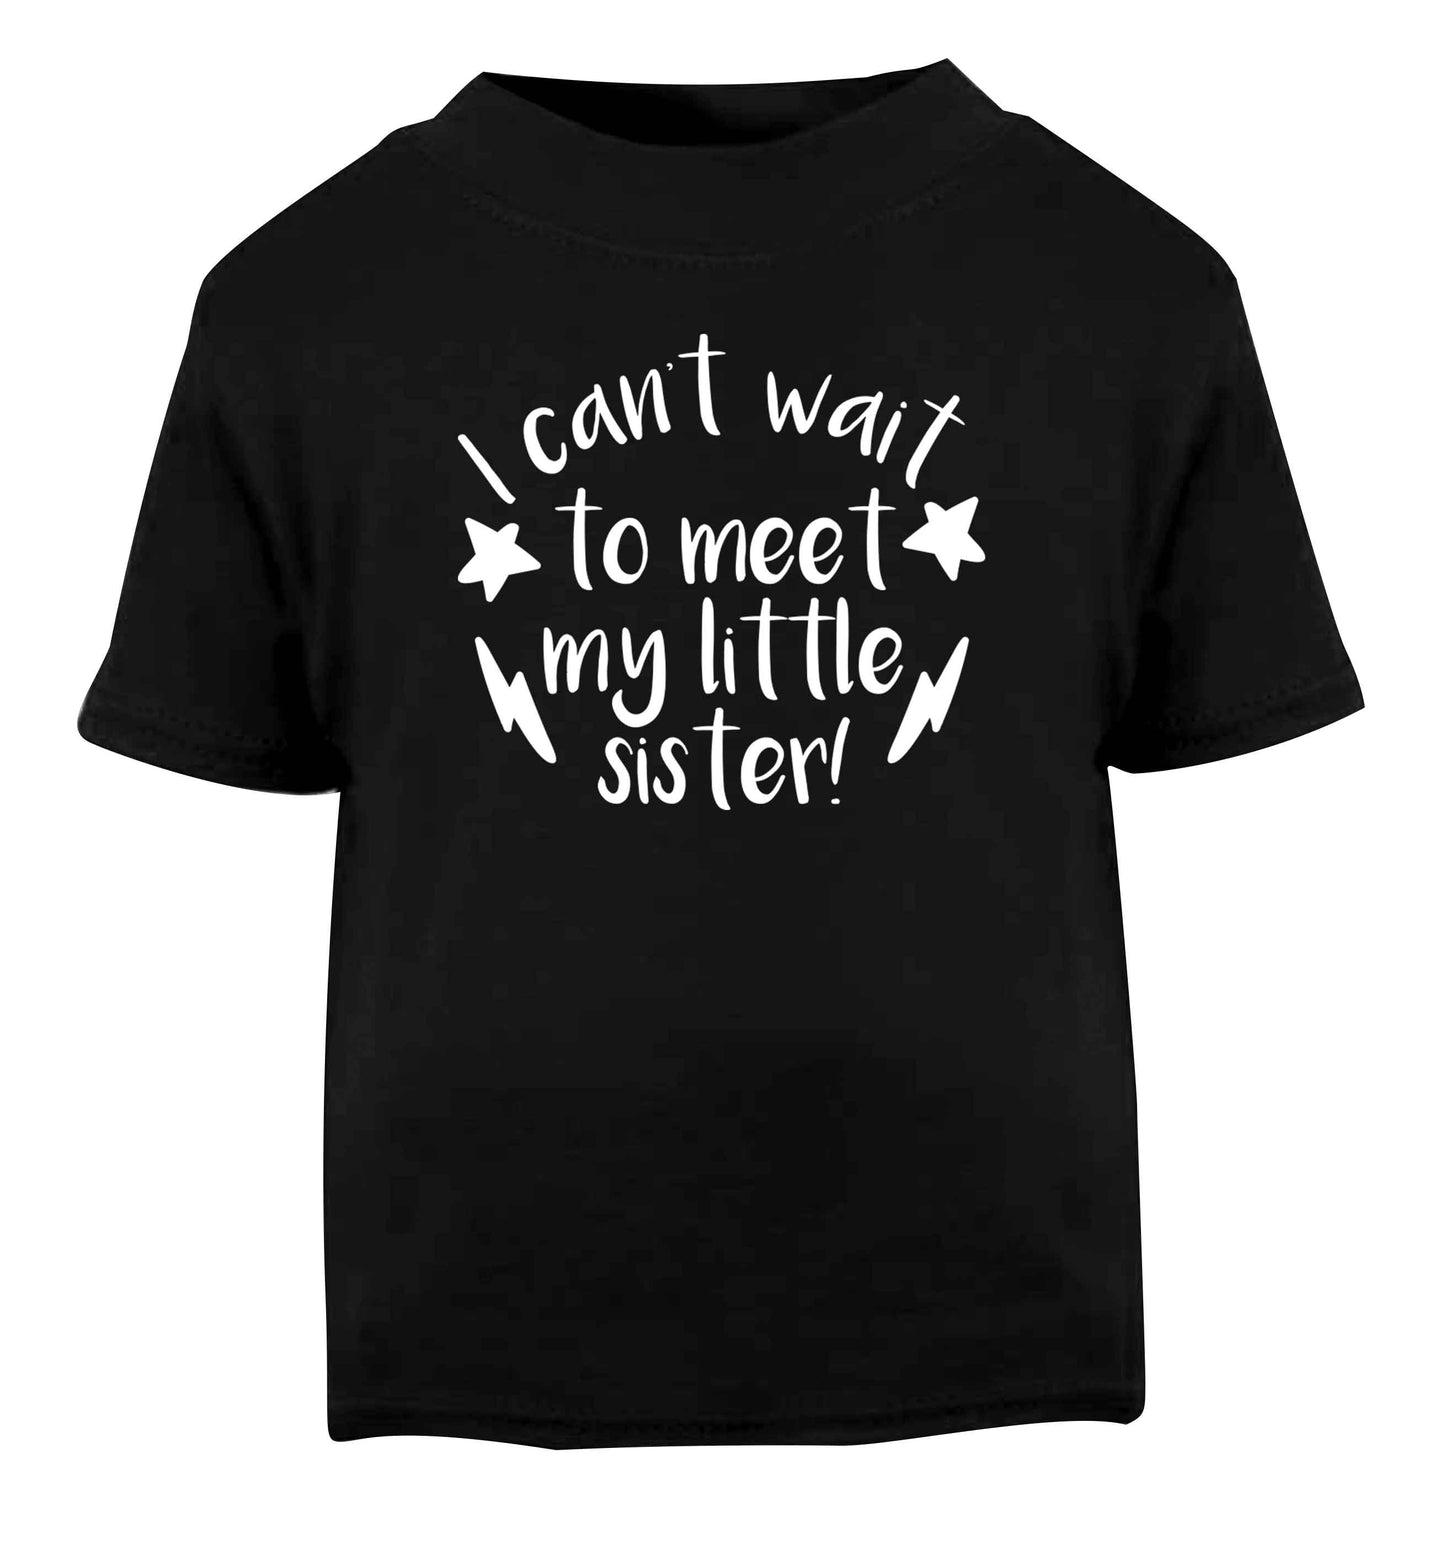 Something special growing inside it's my little sister I can't wait to say hi! Black Baby Toddler Tshirt 2 years